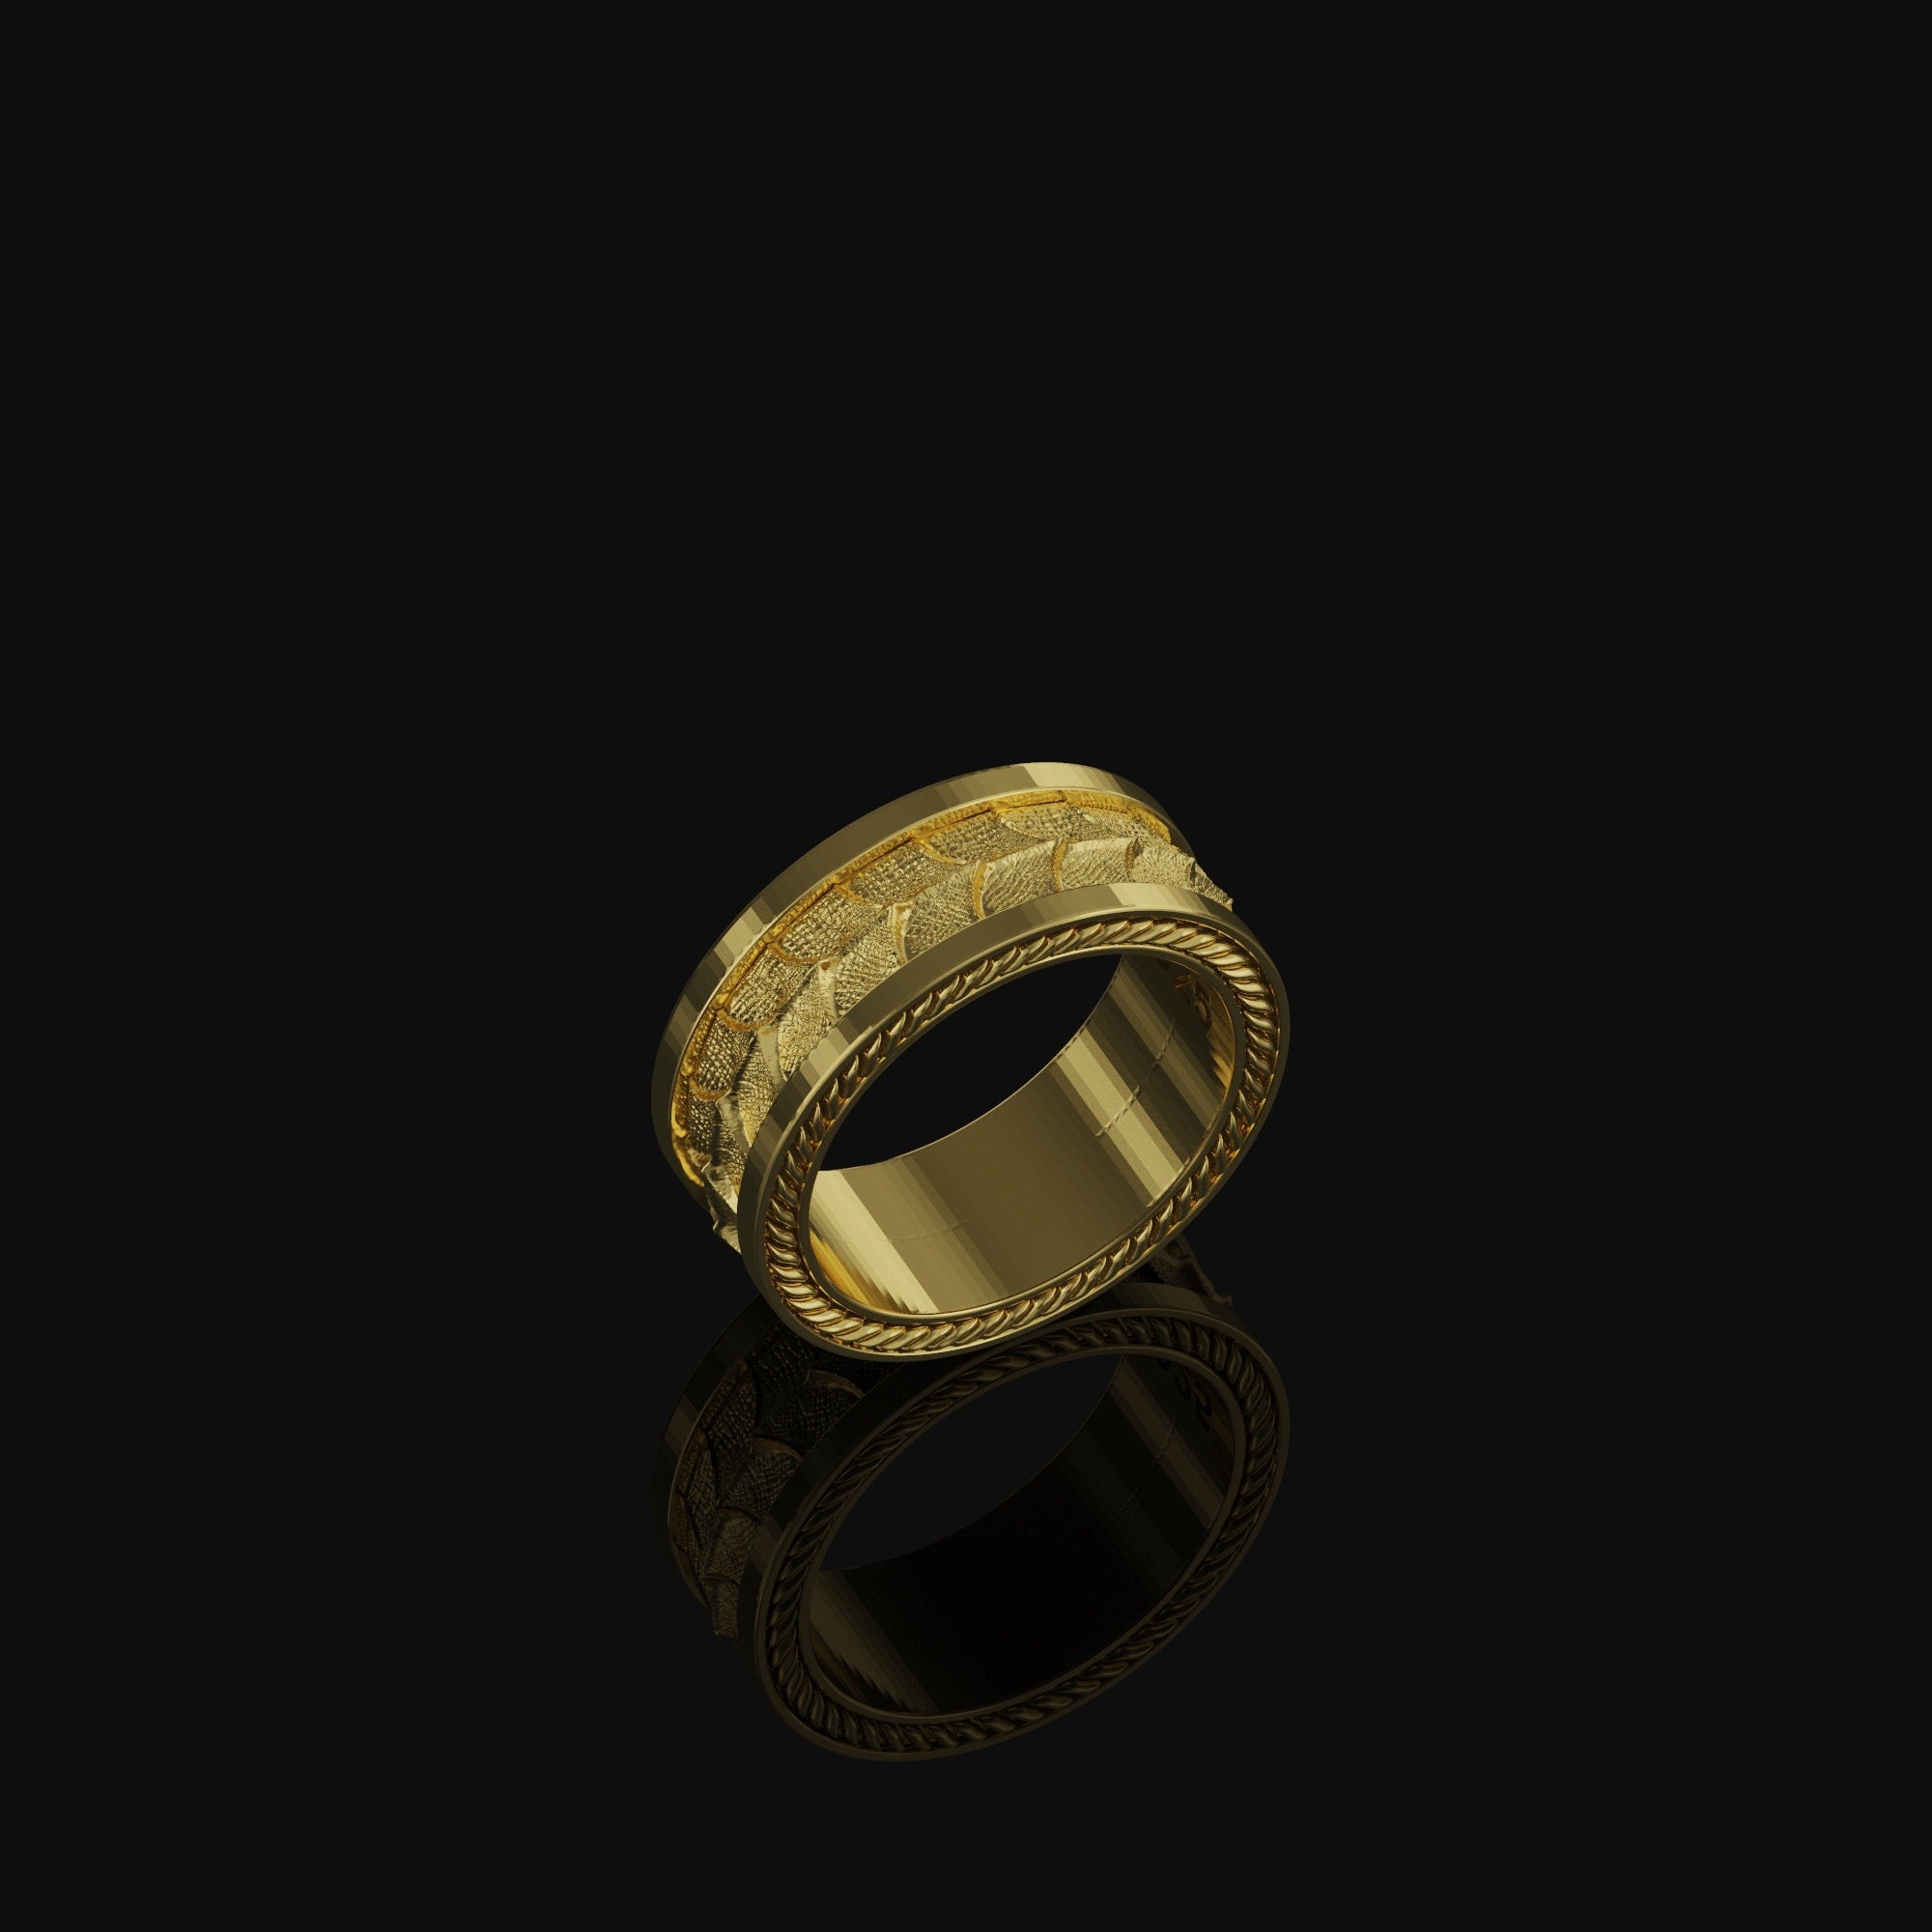 Serpent Skin Band - Engravable Gold Finish